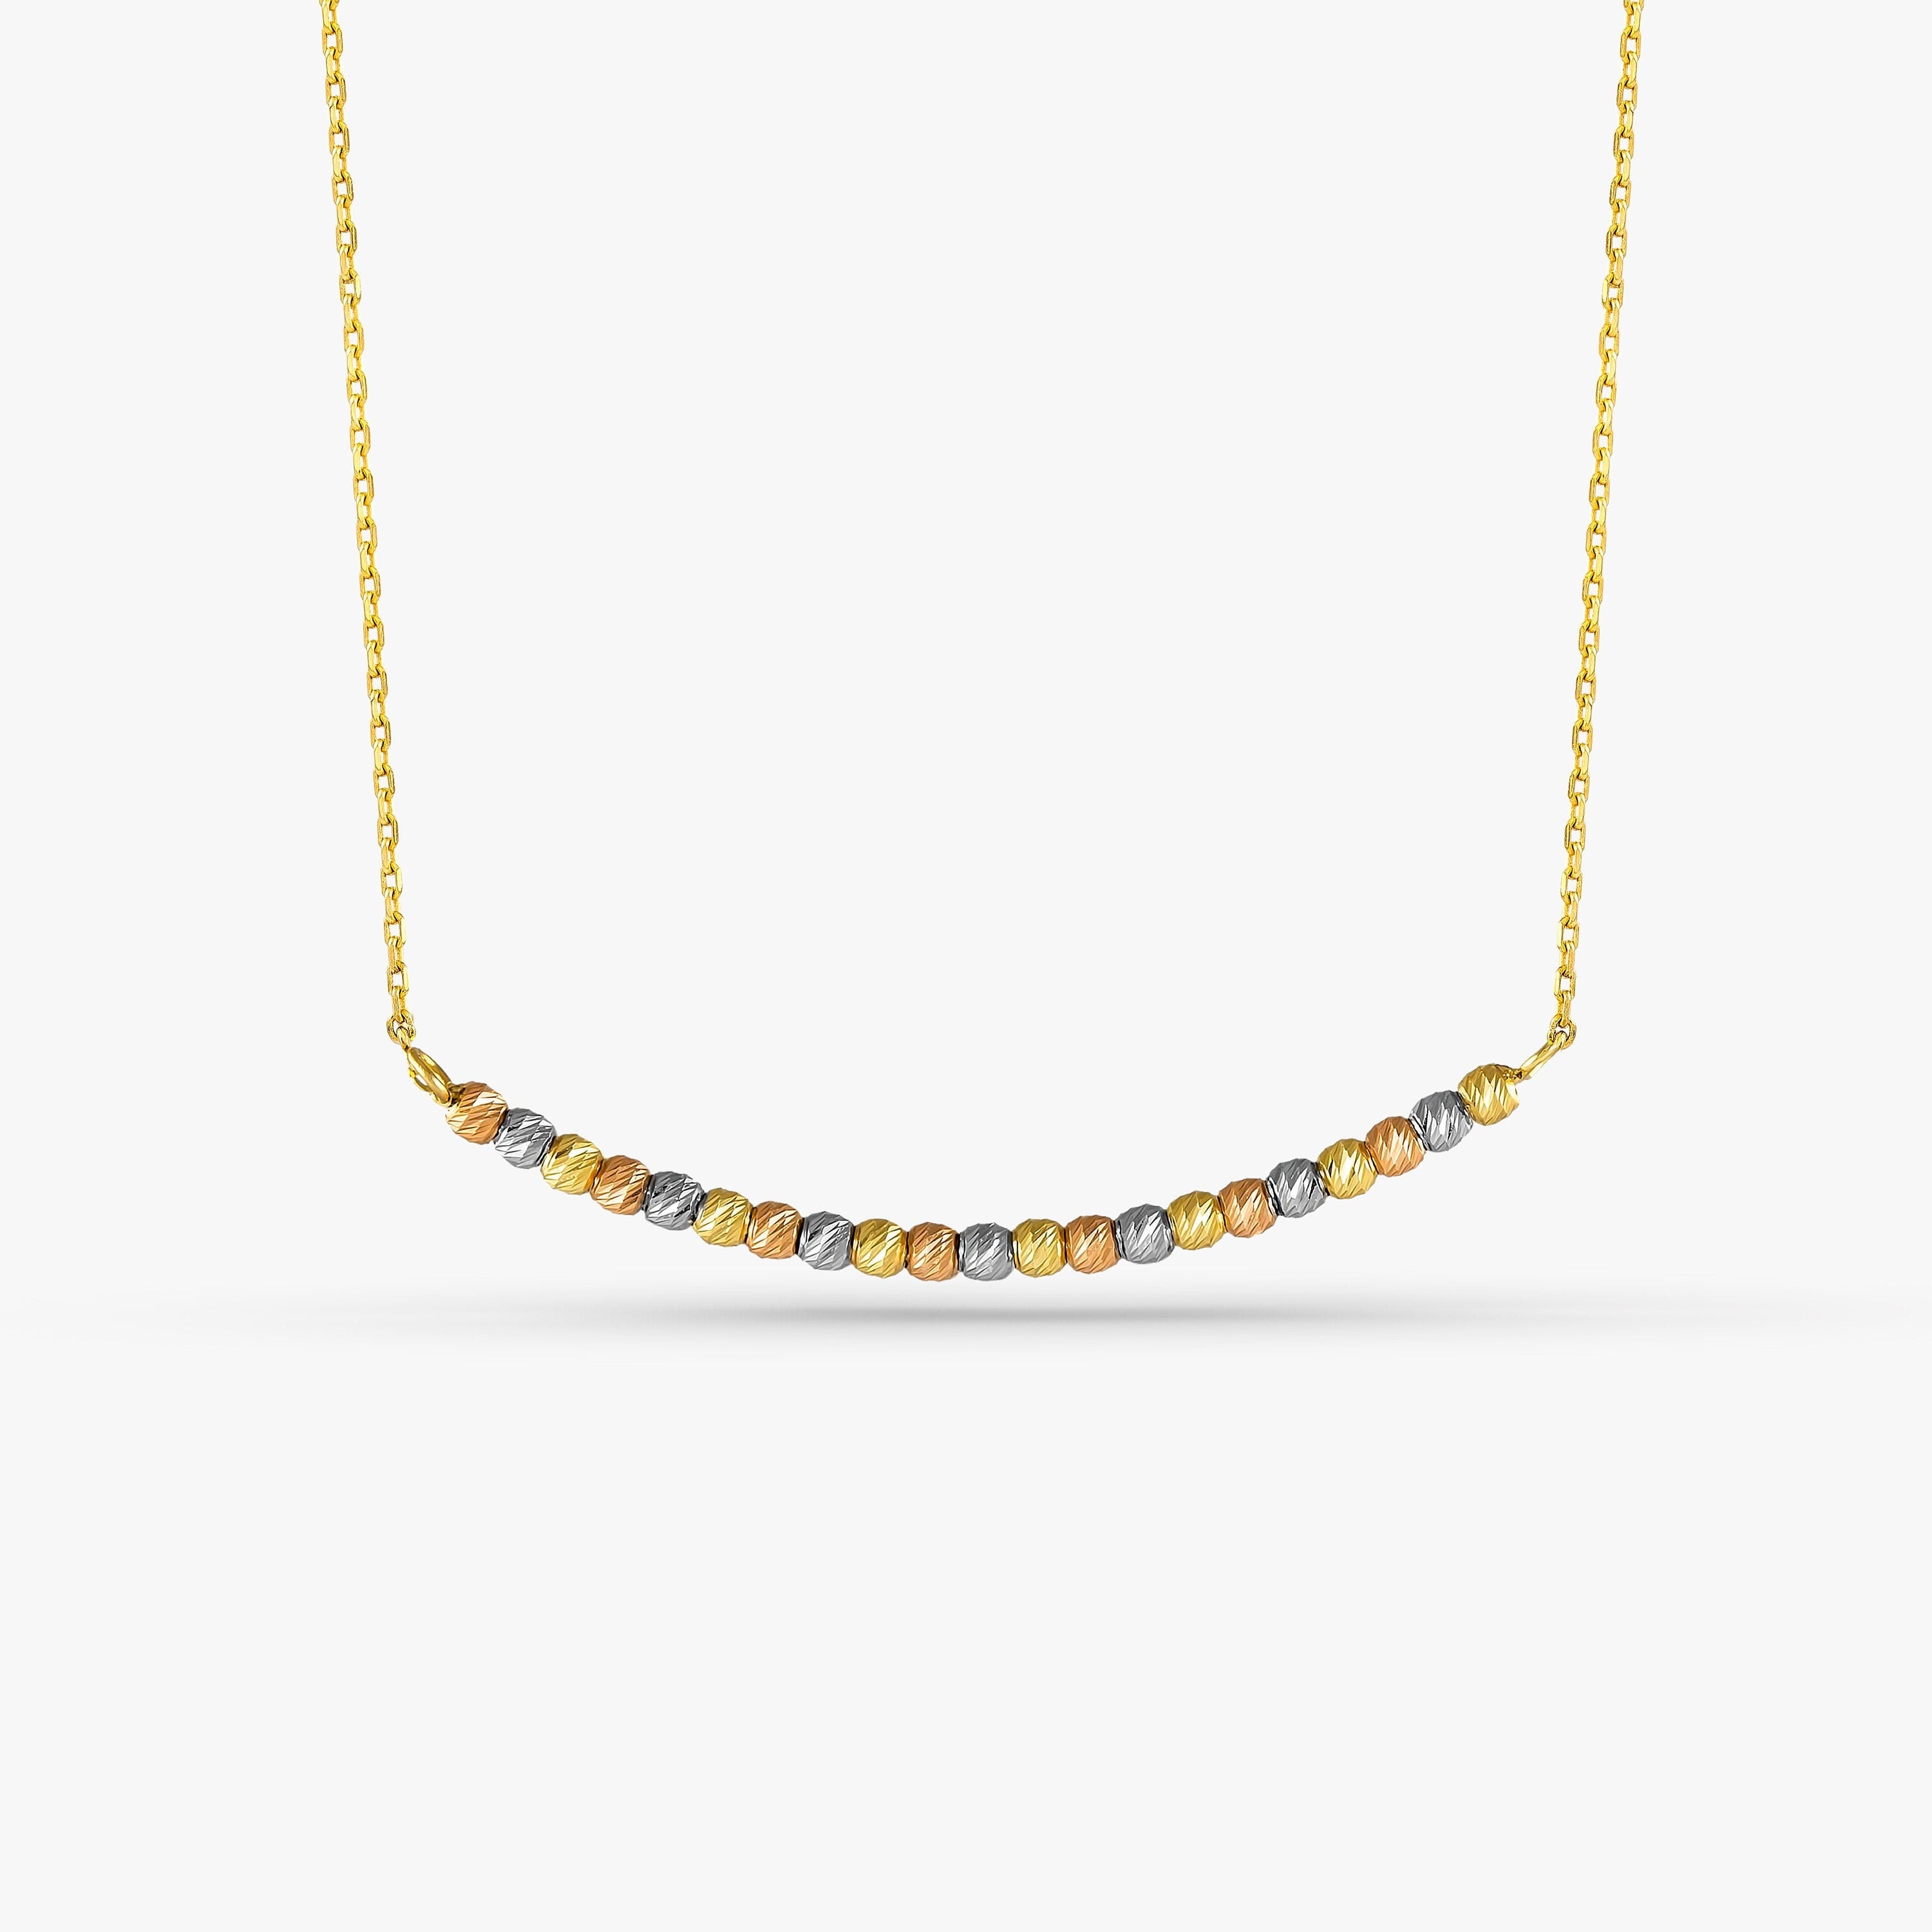 14K Gold Bar Necklace With Diamond Cut Beads